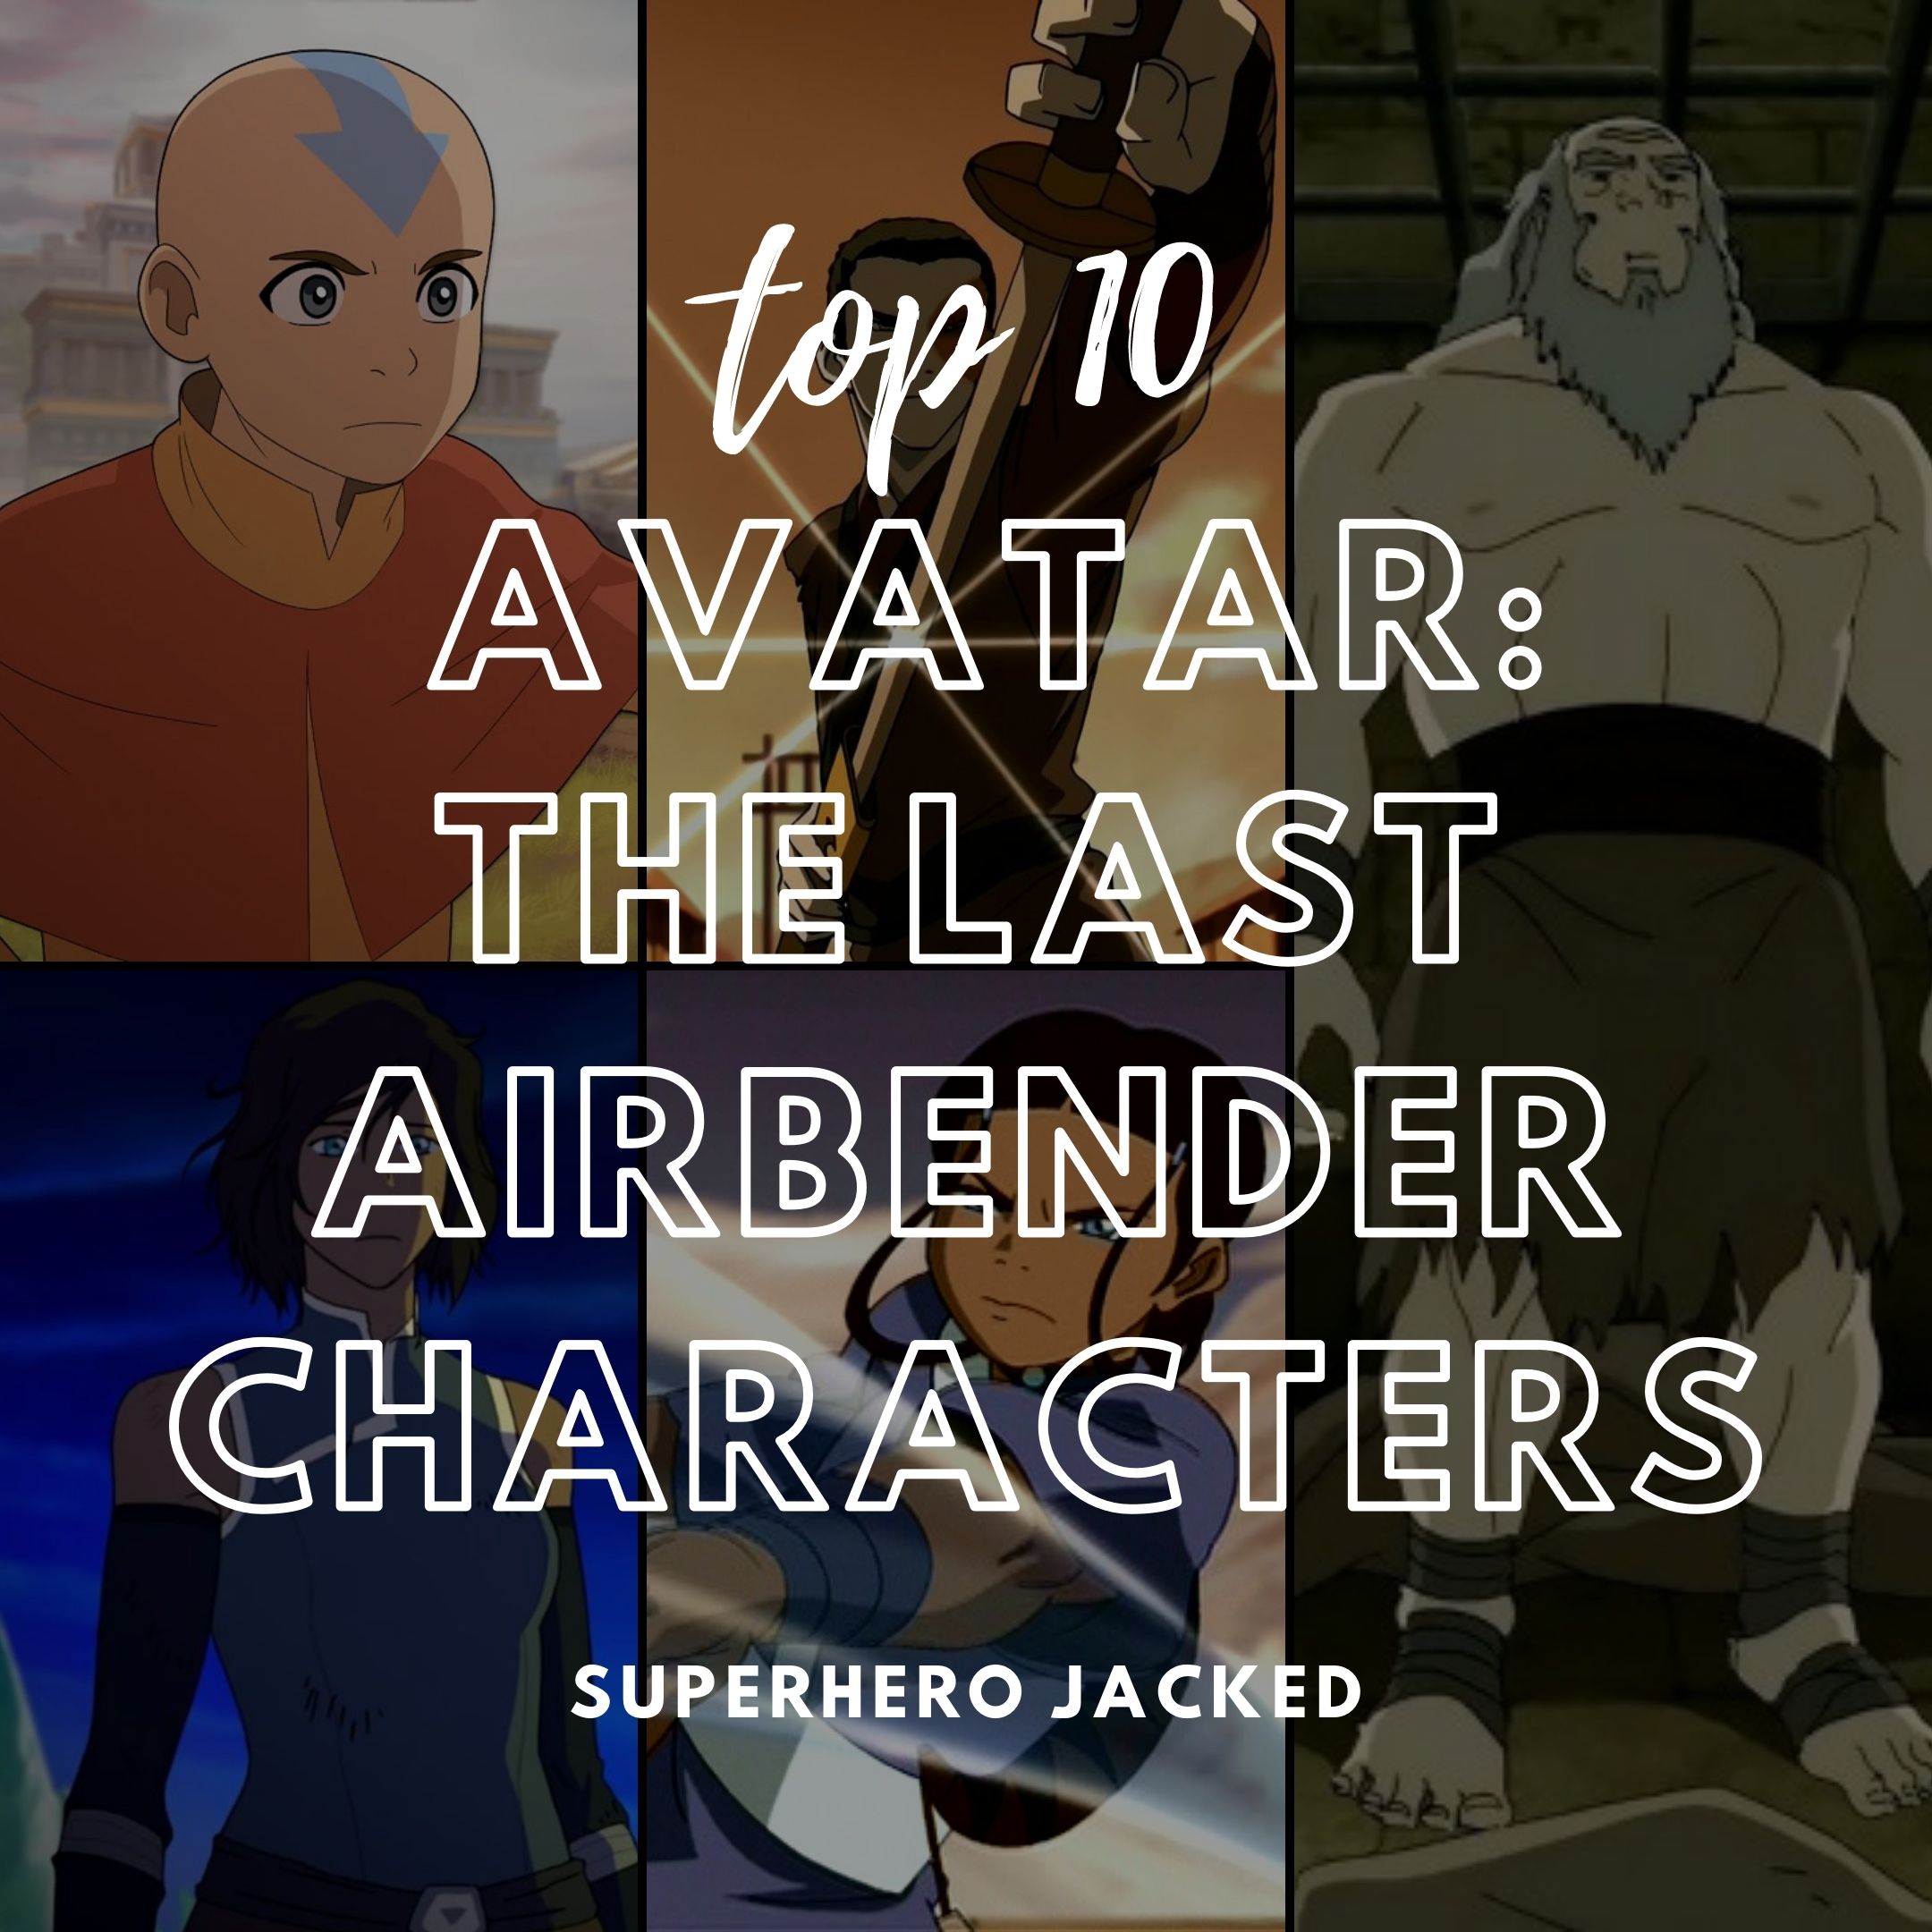 The Most Powerful Avatar The Last Airbender Characters Ranked